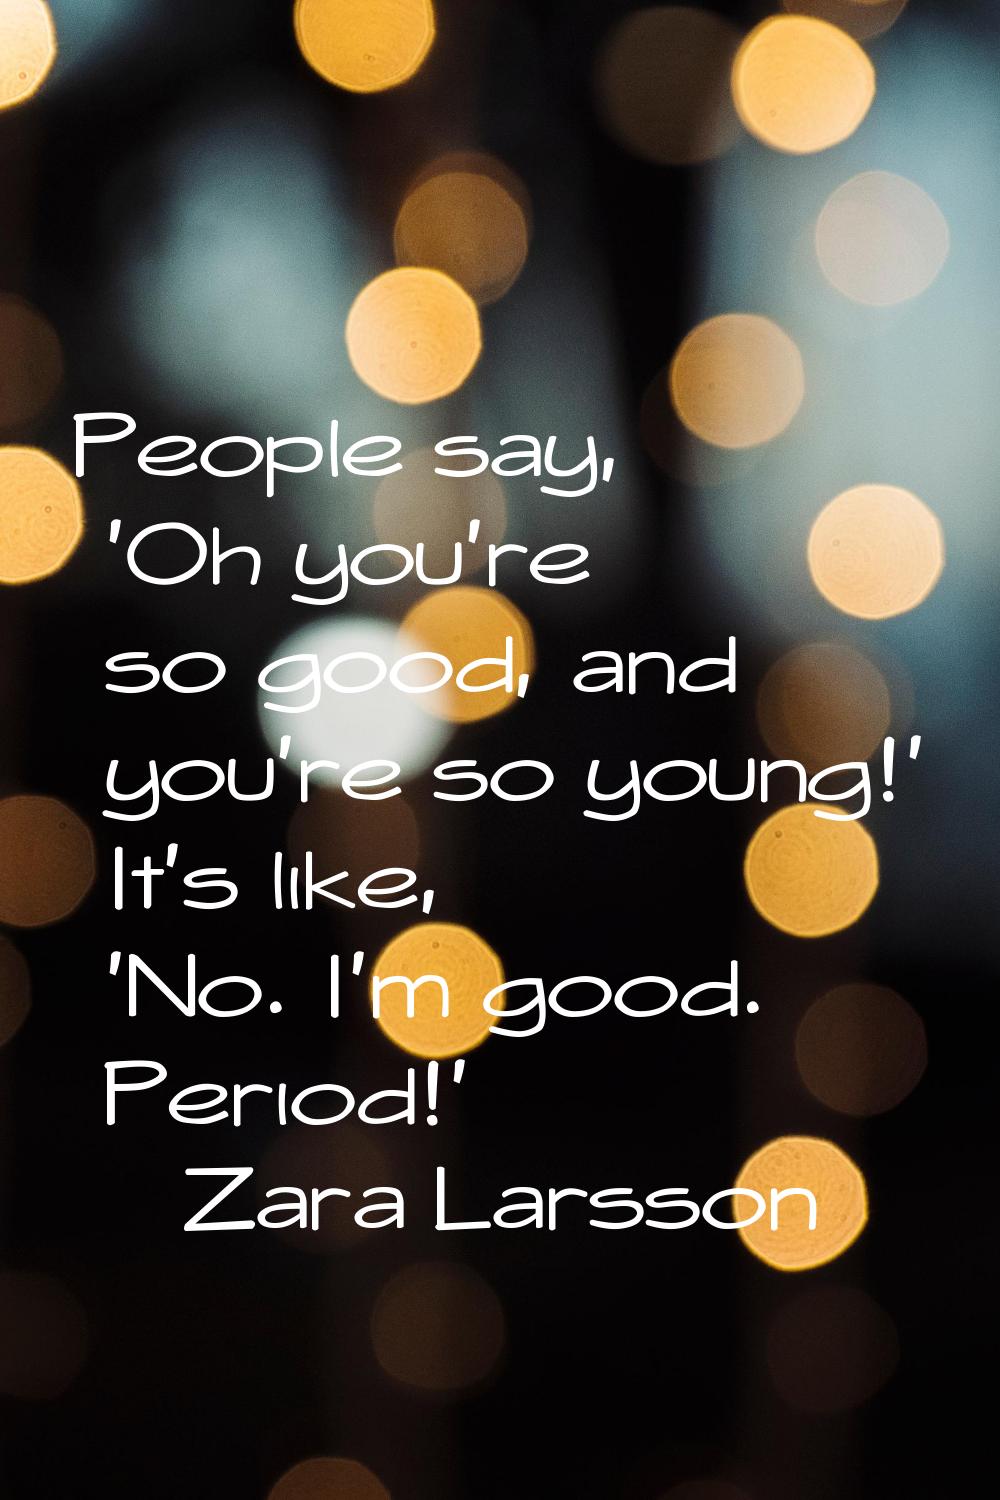 People say, 'Oh you're so good, and you're so young!' It's like, 'No. I'm good. Period!'